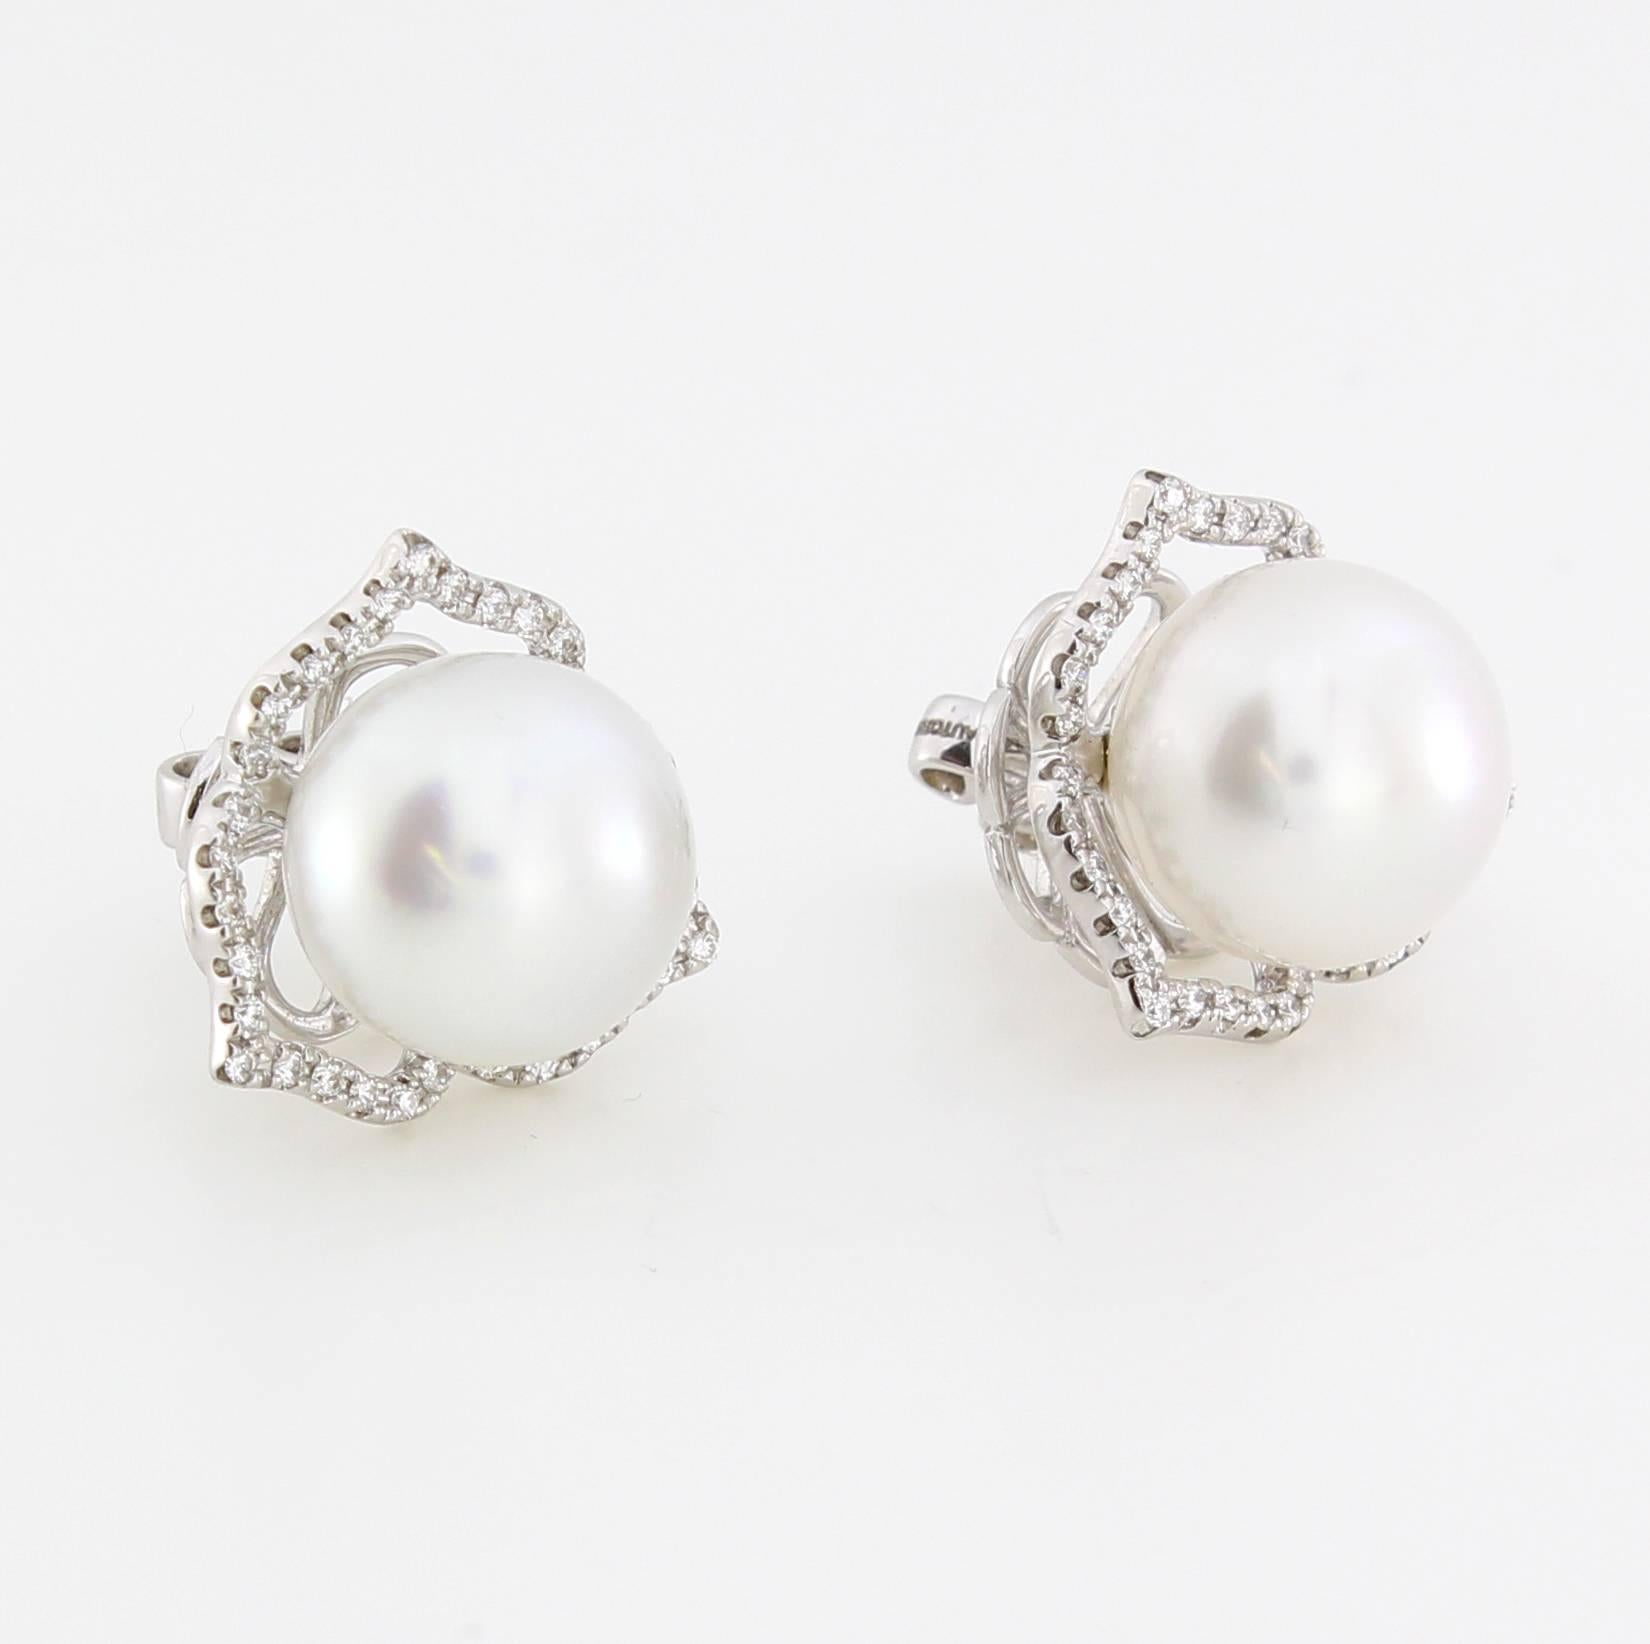 The 3 Point Stud Earrings are from the AUTORE Timeless Collection.
This piece is crafted in 18k White Gold with White Diamonds (H SL1 0.414ct Brilliant Cut) with 12mm High Button White South Sea Pearls. 